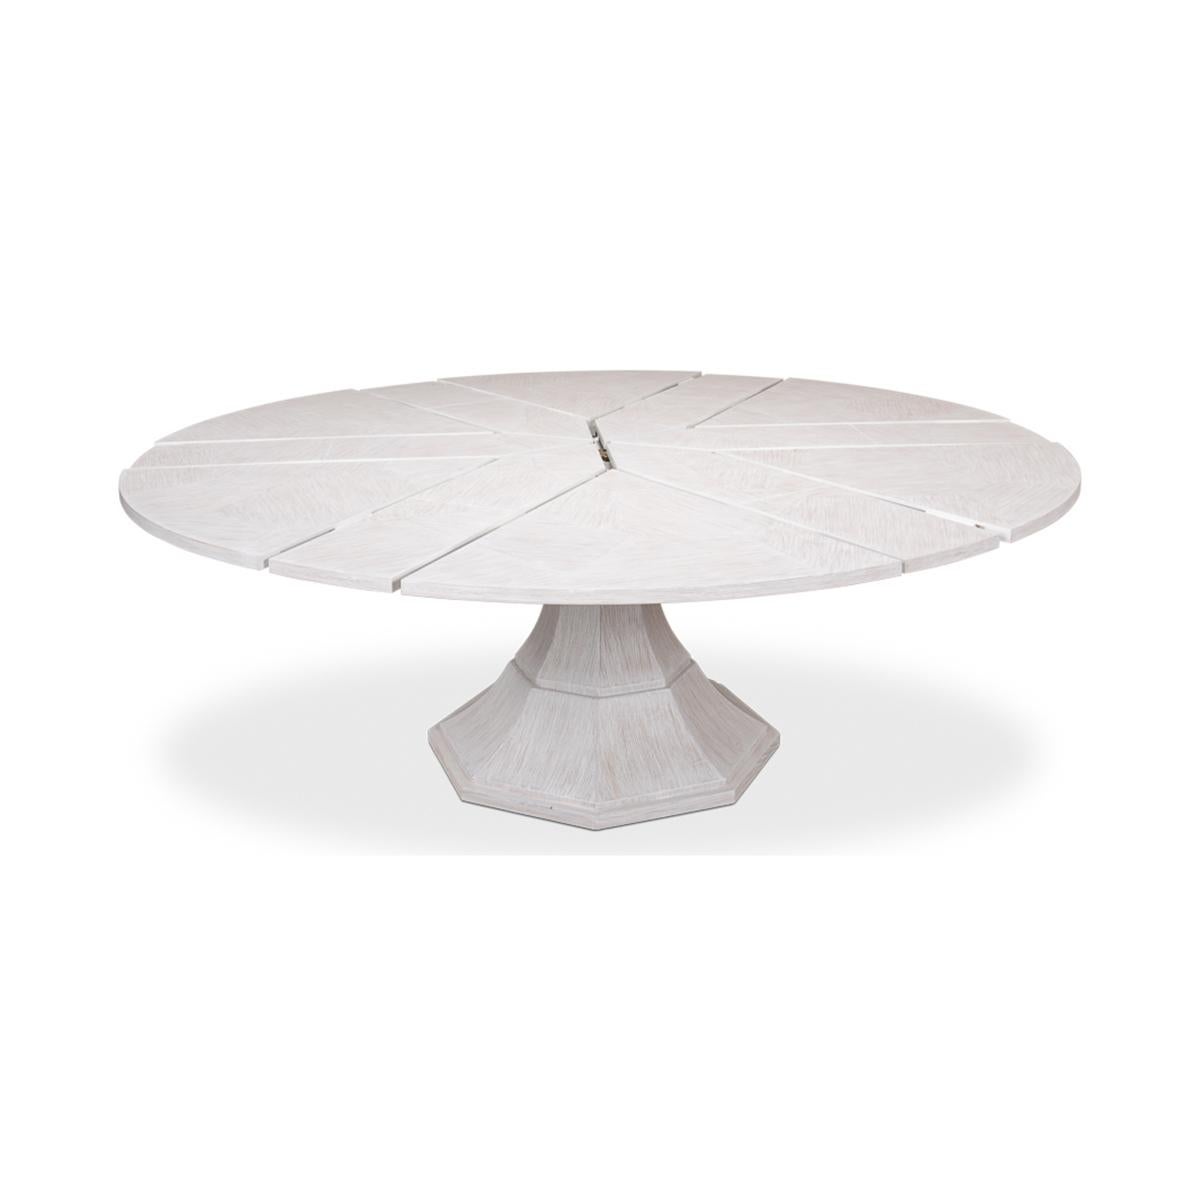  Modern Round oak veneered extension Dining Table with self-storing leaves, on a tapered column form pedestal base.

Open dimensions: 84